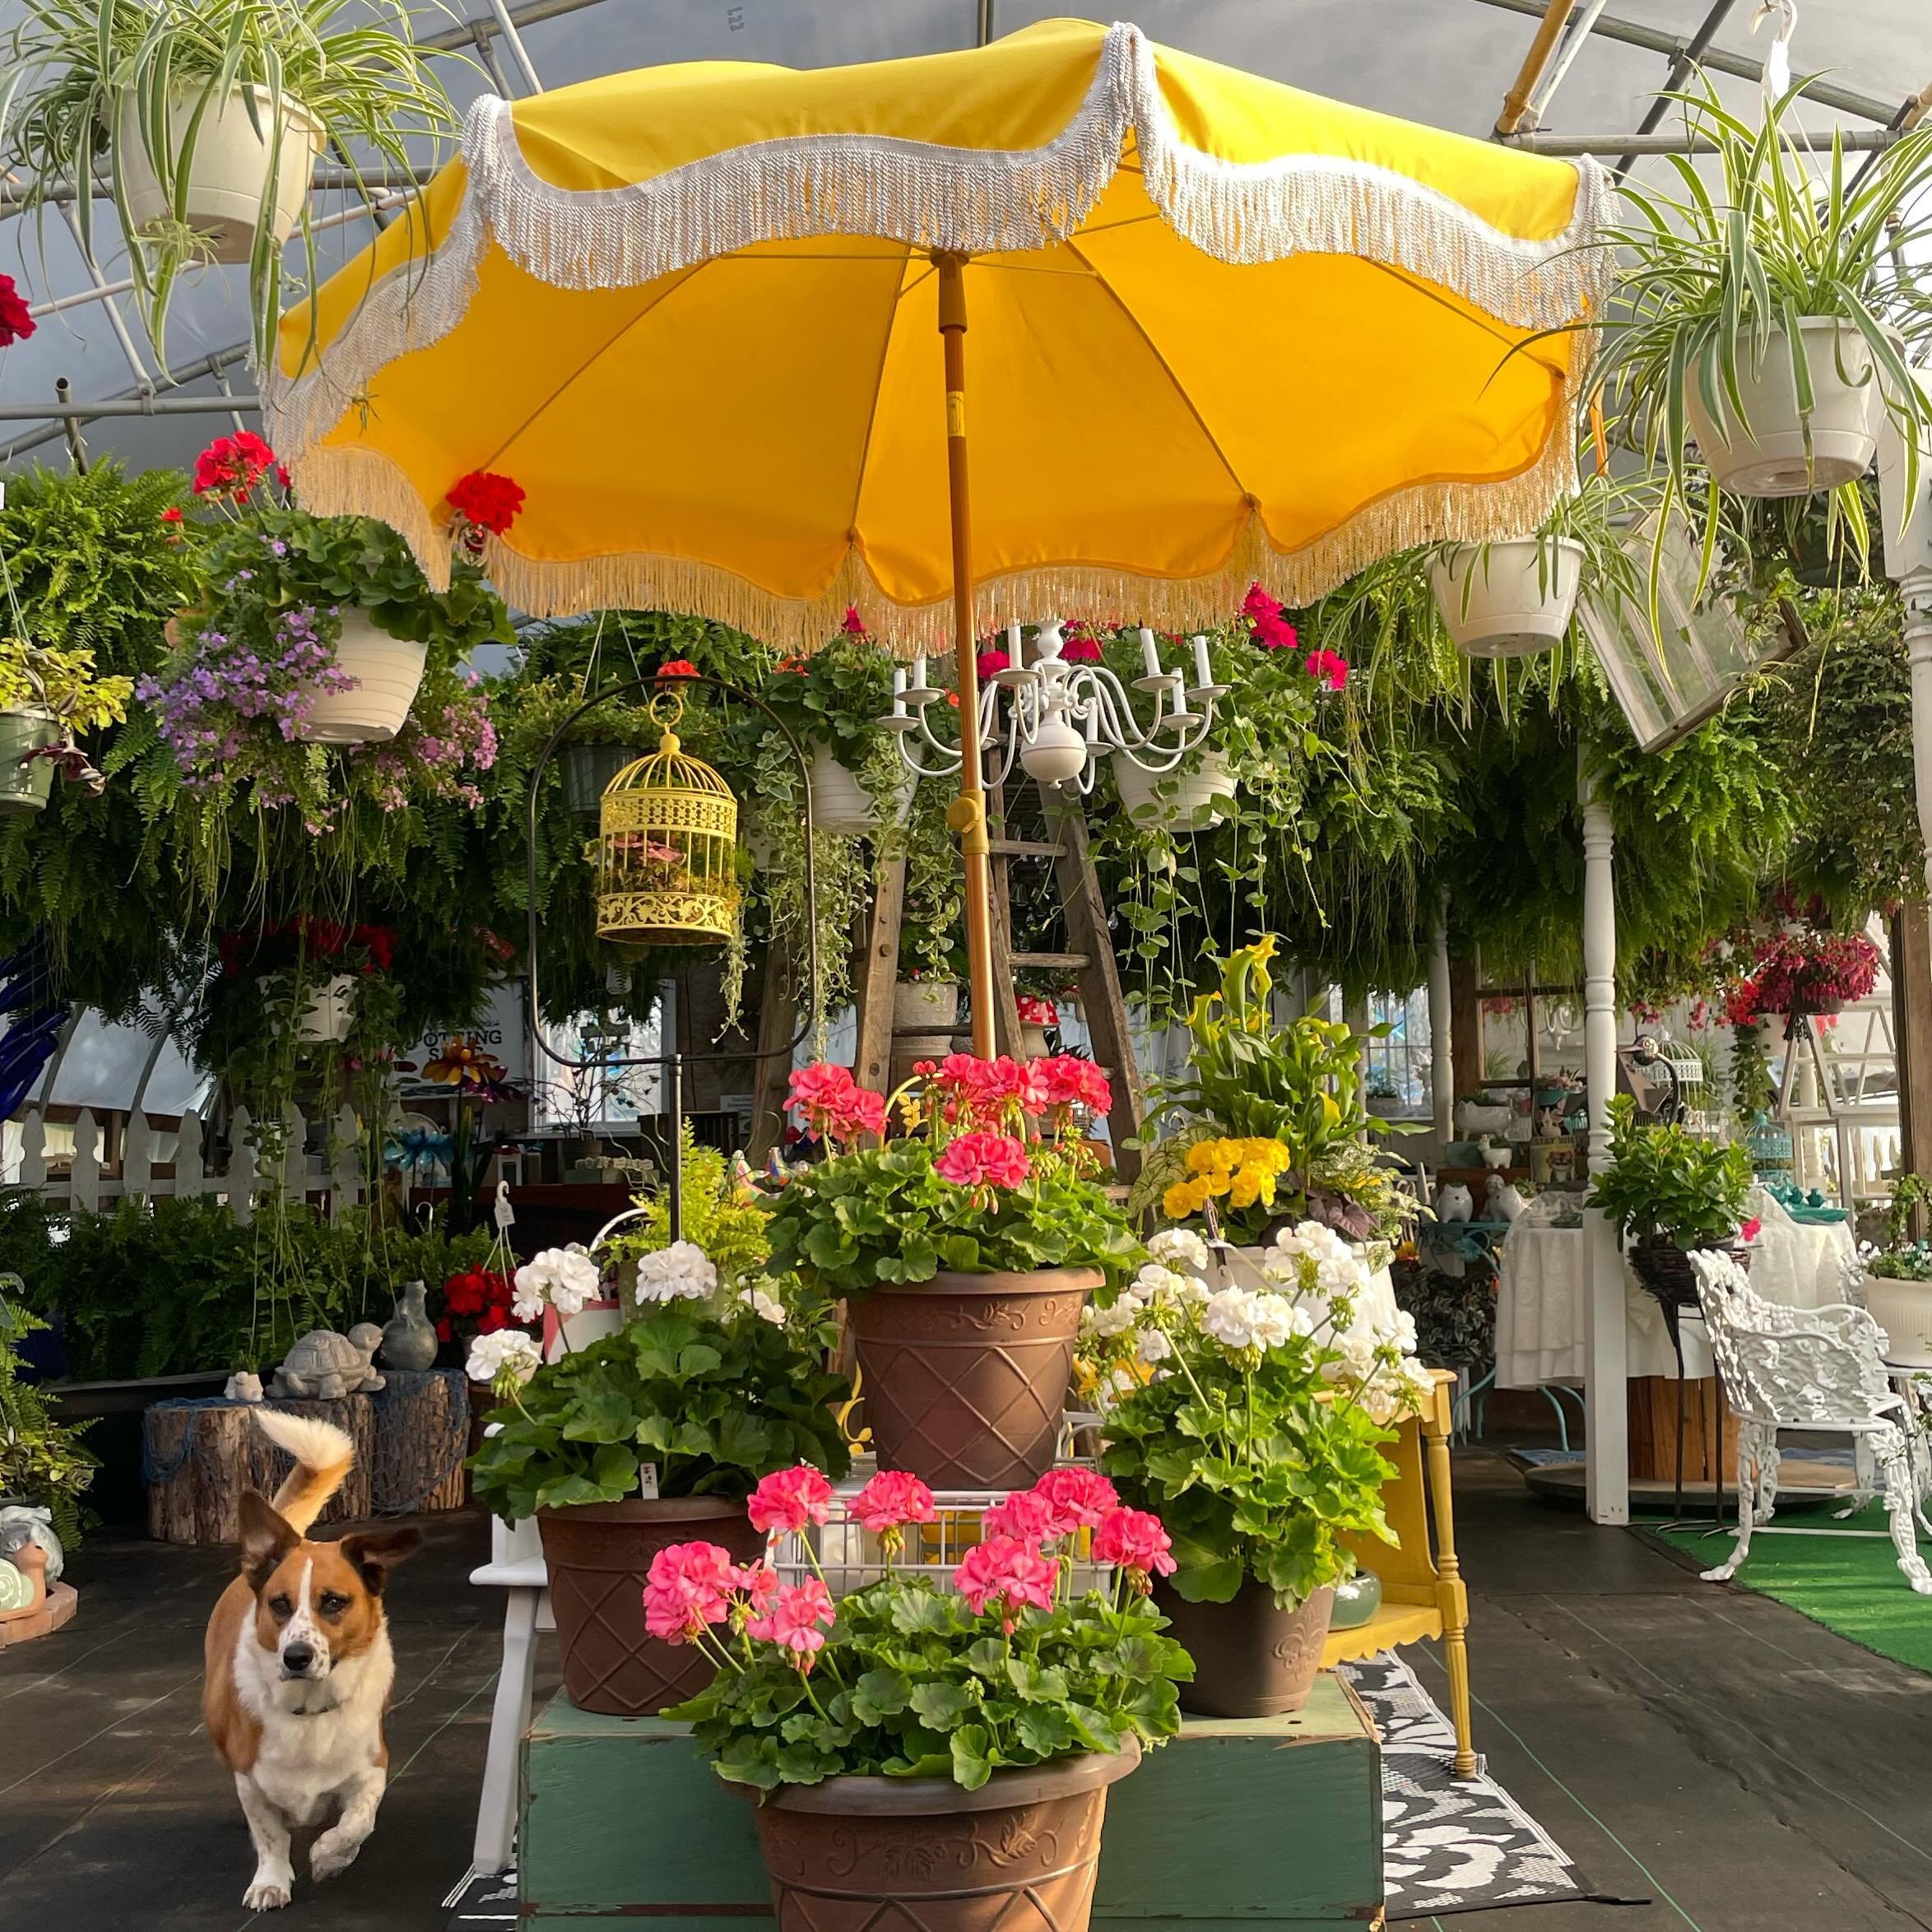 We&rsquo;re channeling the sunshine inside the greenhouse today! 🌞 Hope to see you soon.